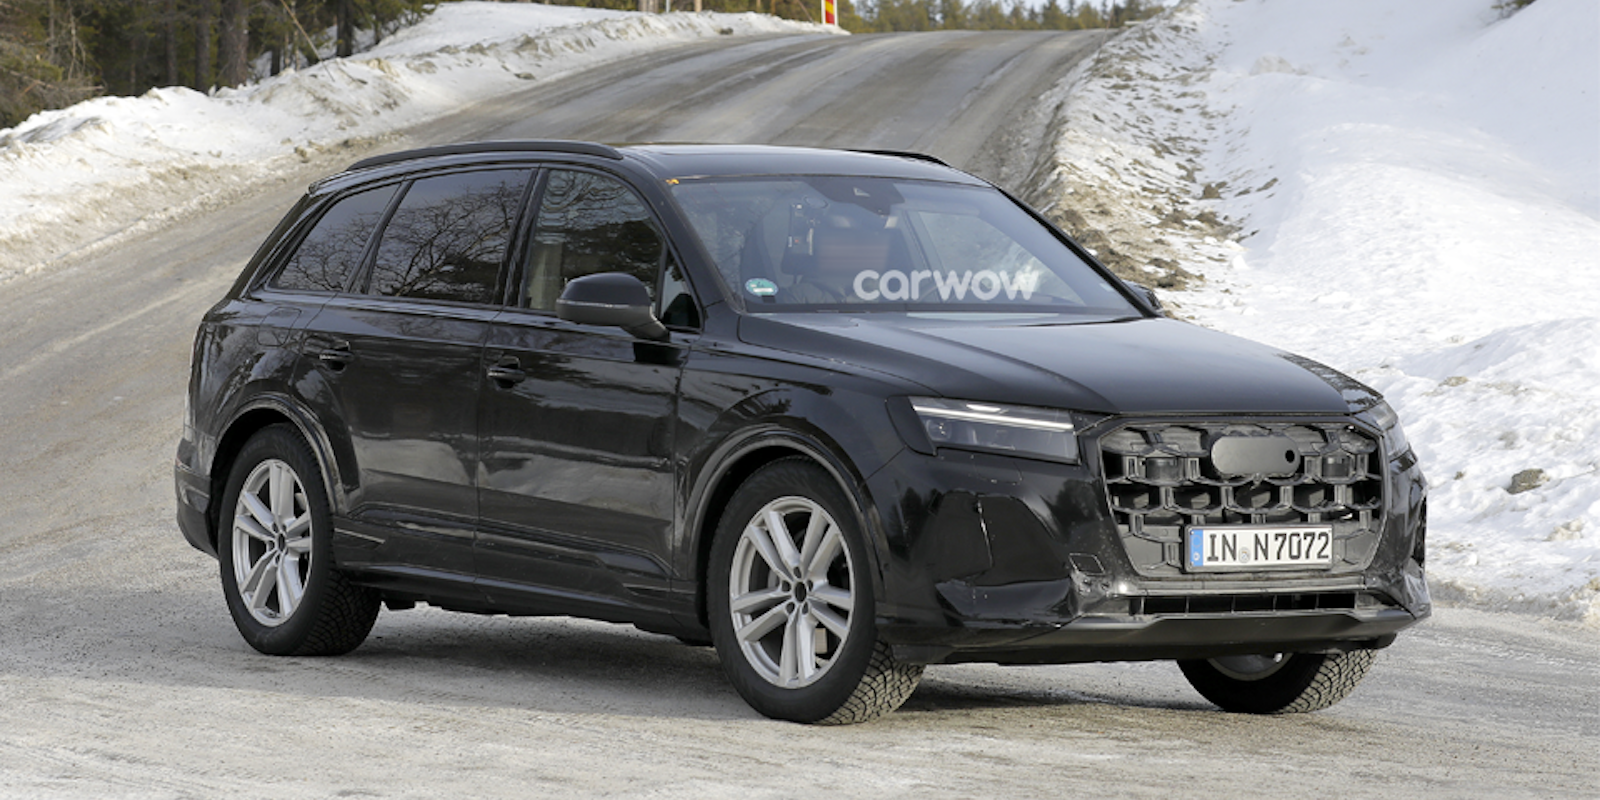 New Audi Q7 spotted: price, specs and release date | carwow